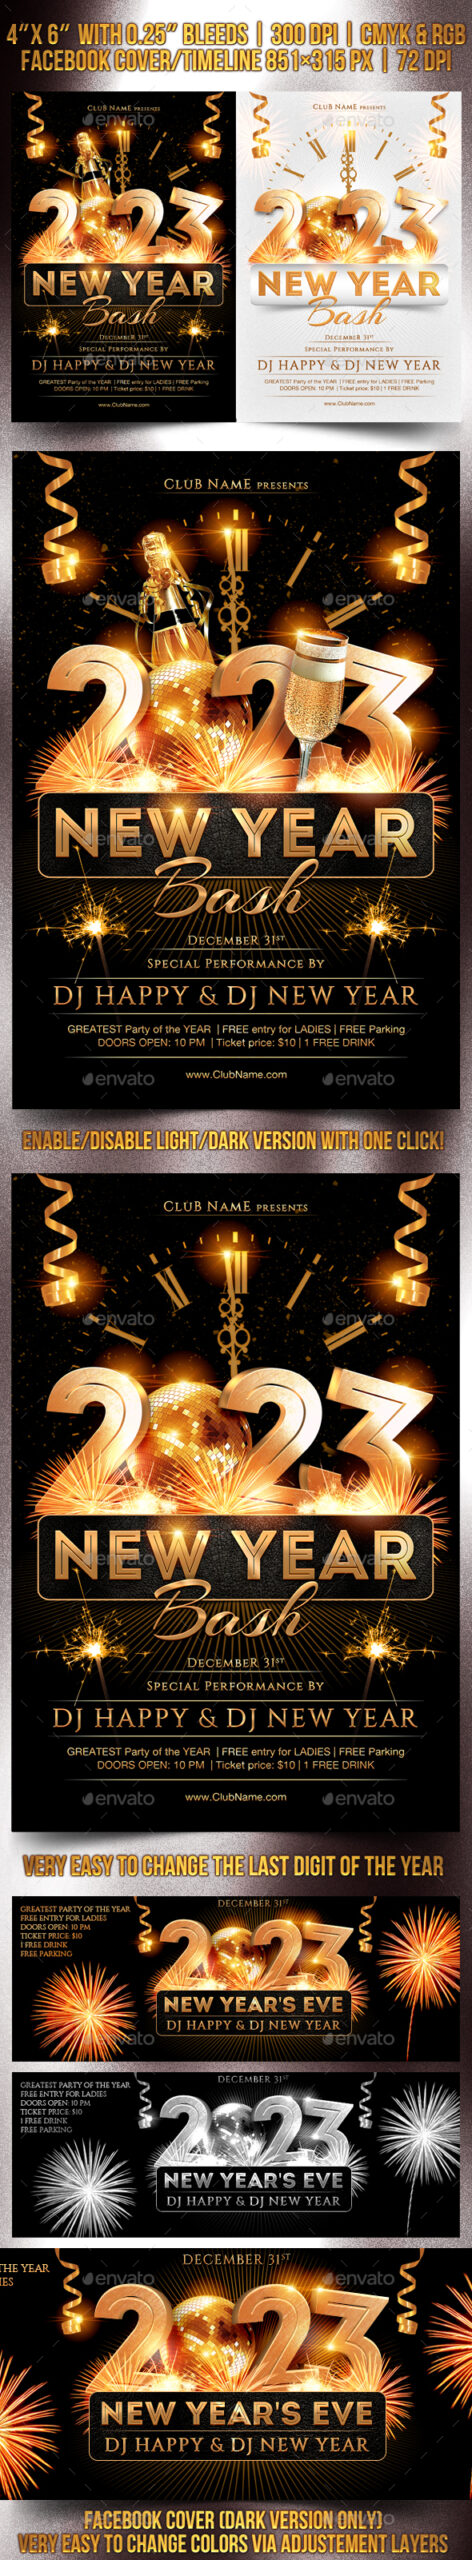 New Year Bash Flyer Template